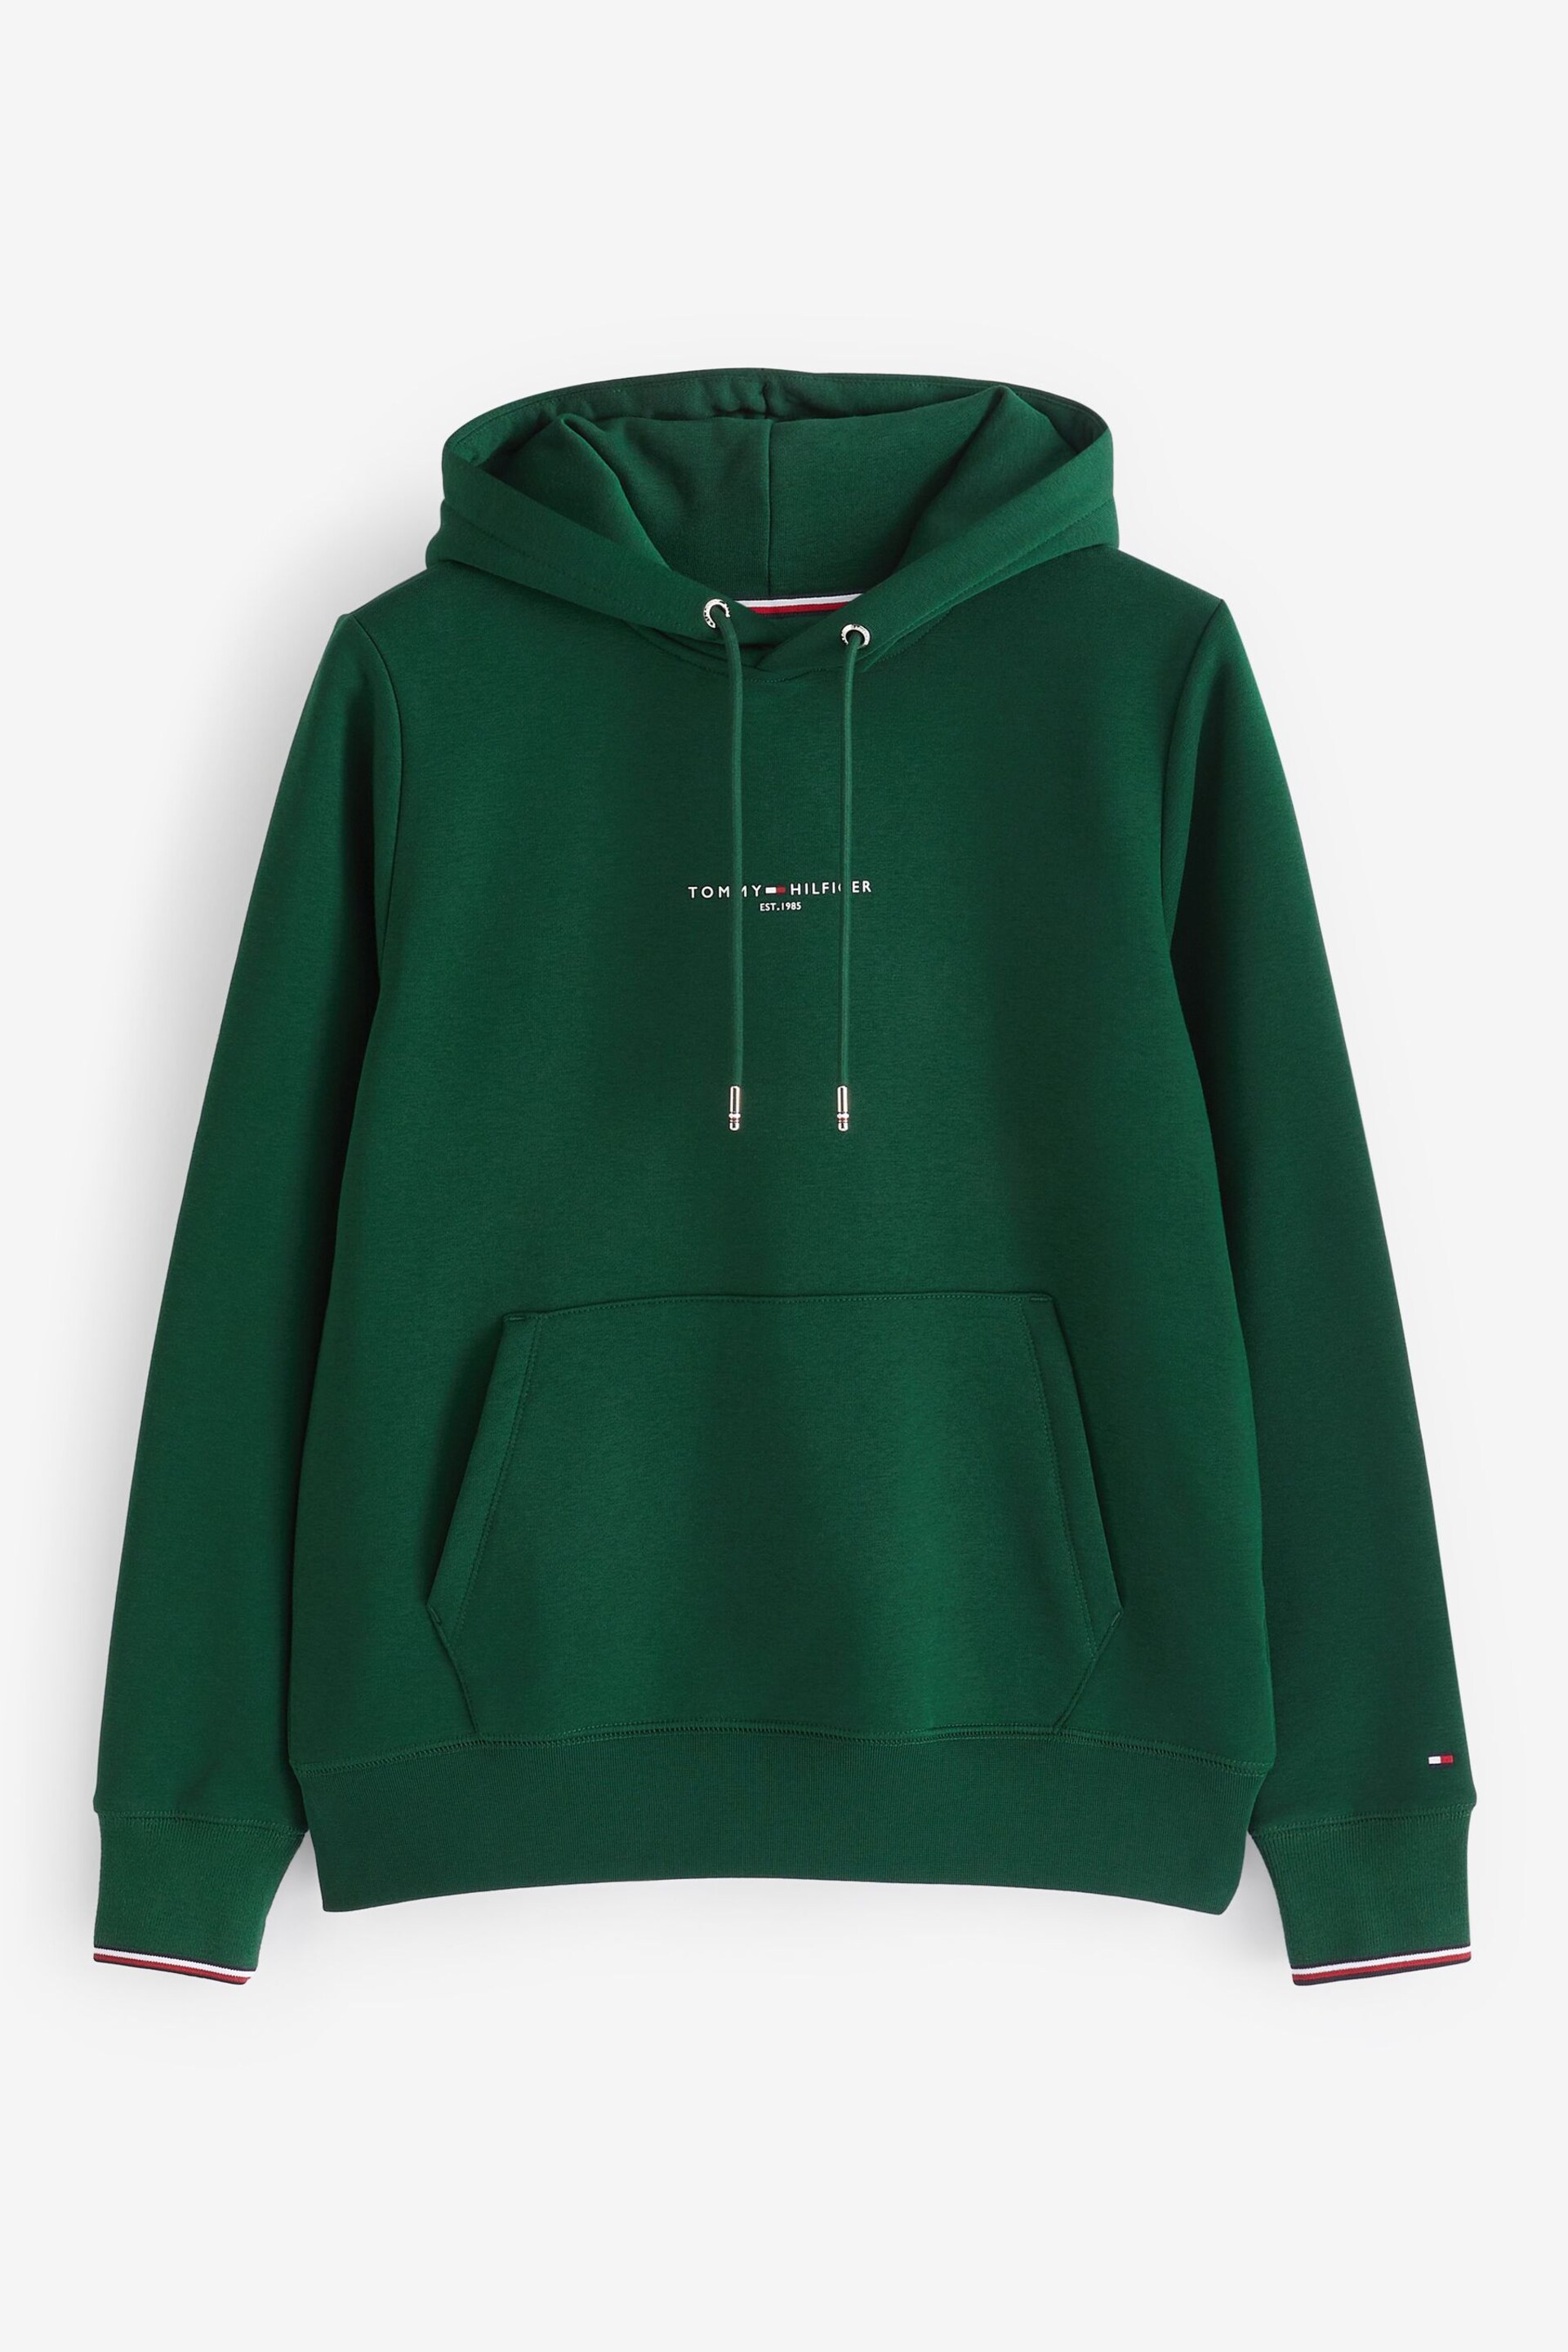 Tommy Hilfiger Green Logo Tipped Hoodie - Image 4 of 4